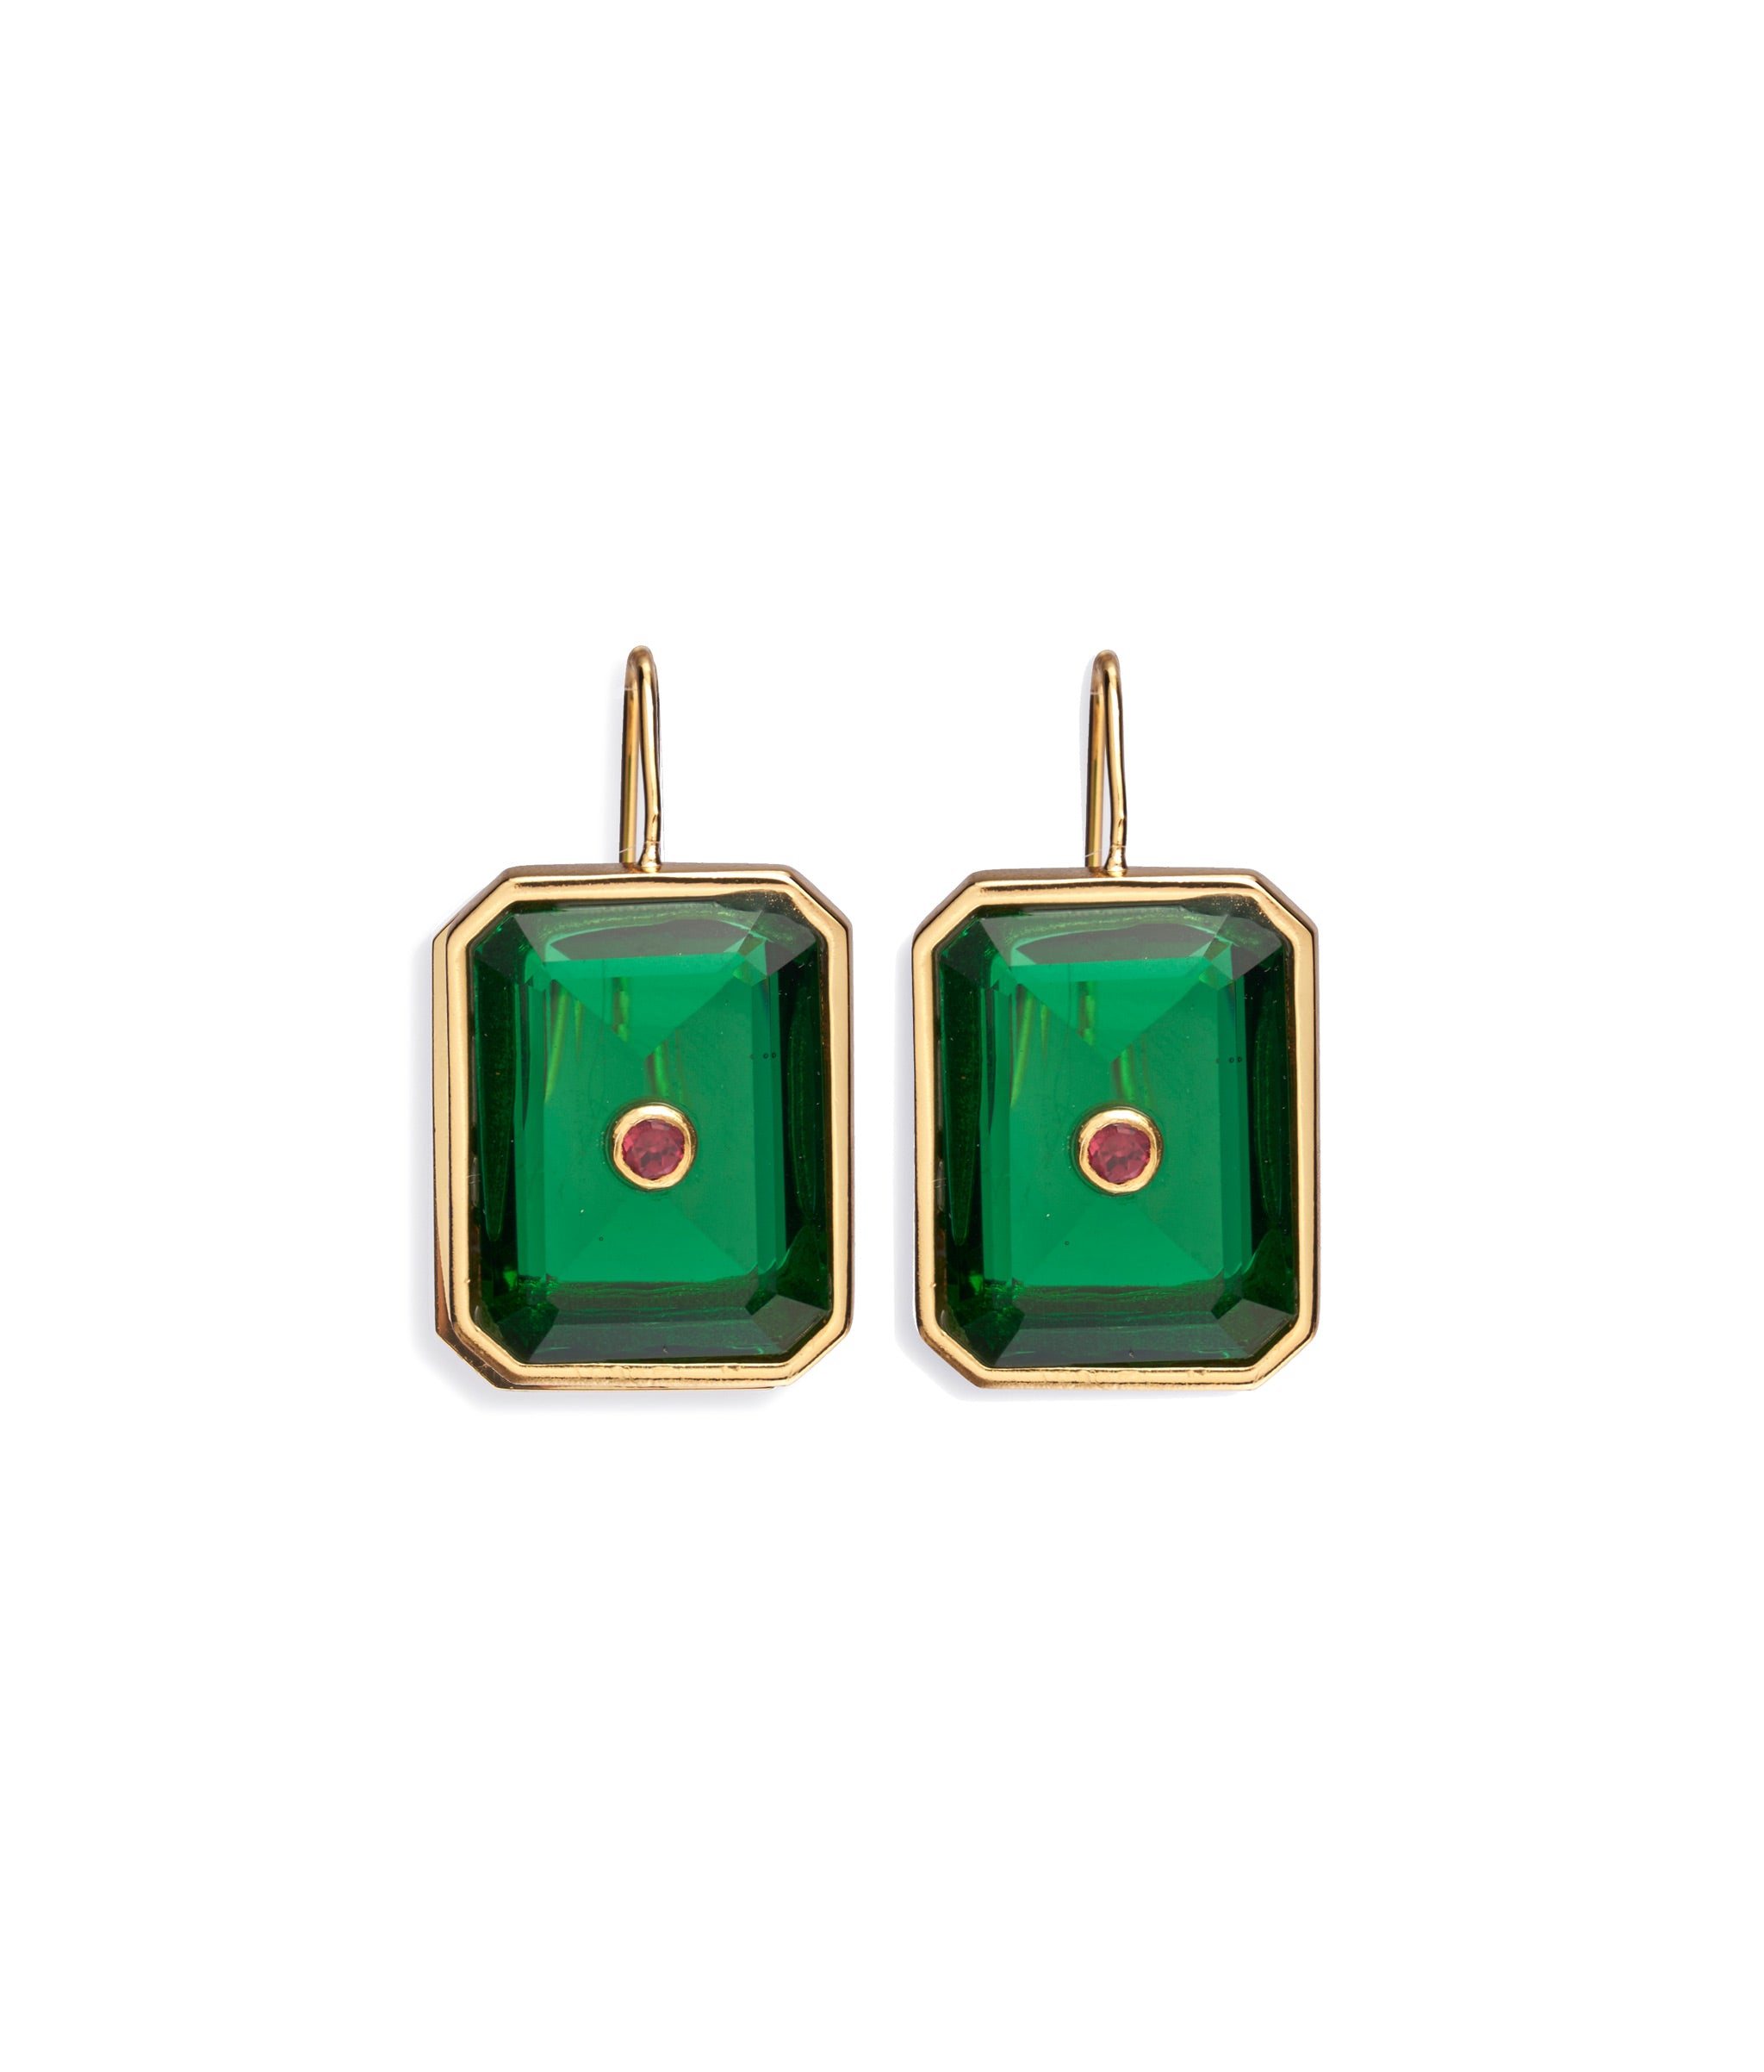 Tile Earrings in Forest. Gold-plated earwires with bright green rectangular glass stones and tiny rhodolite gems.